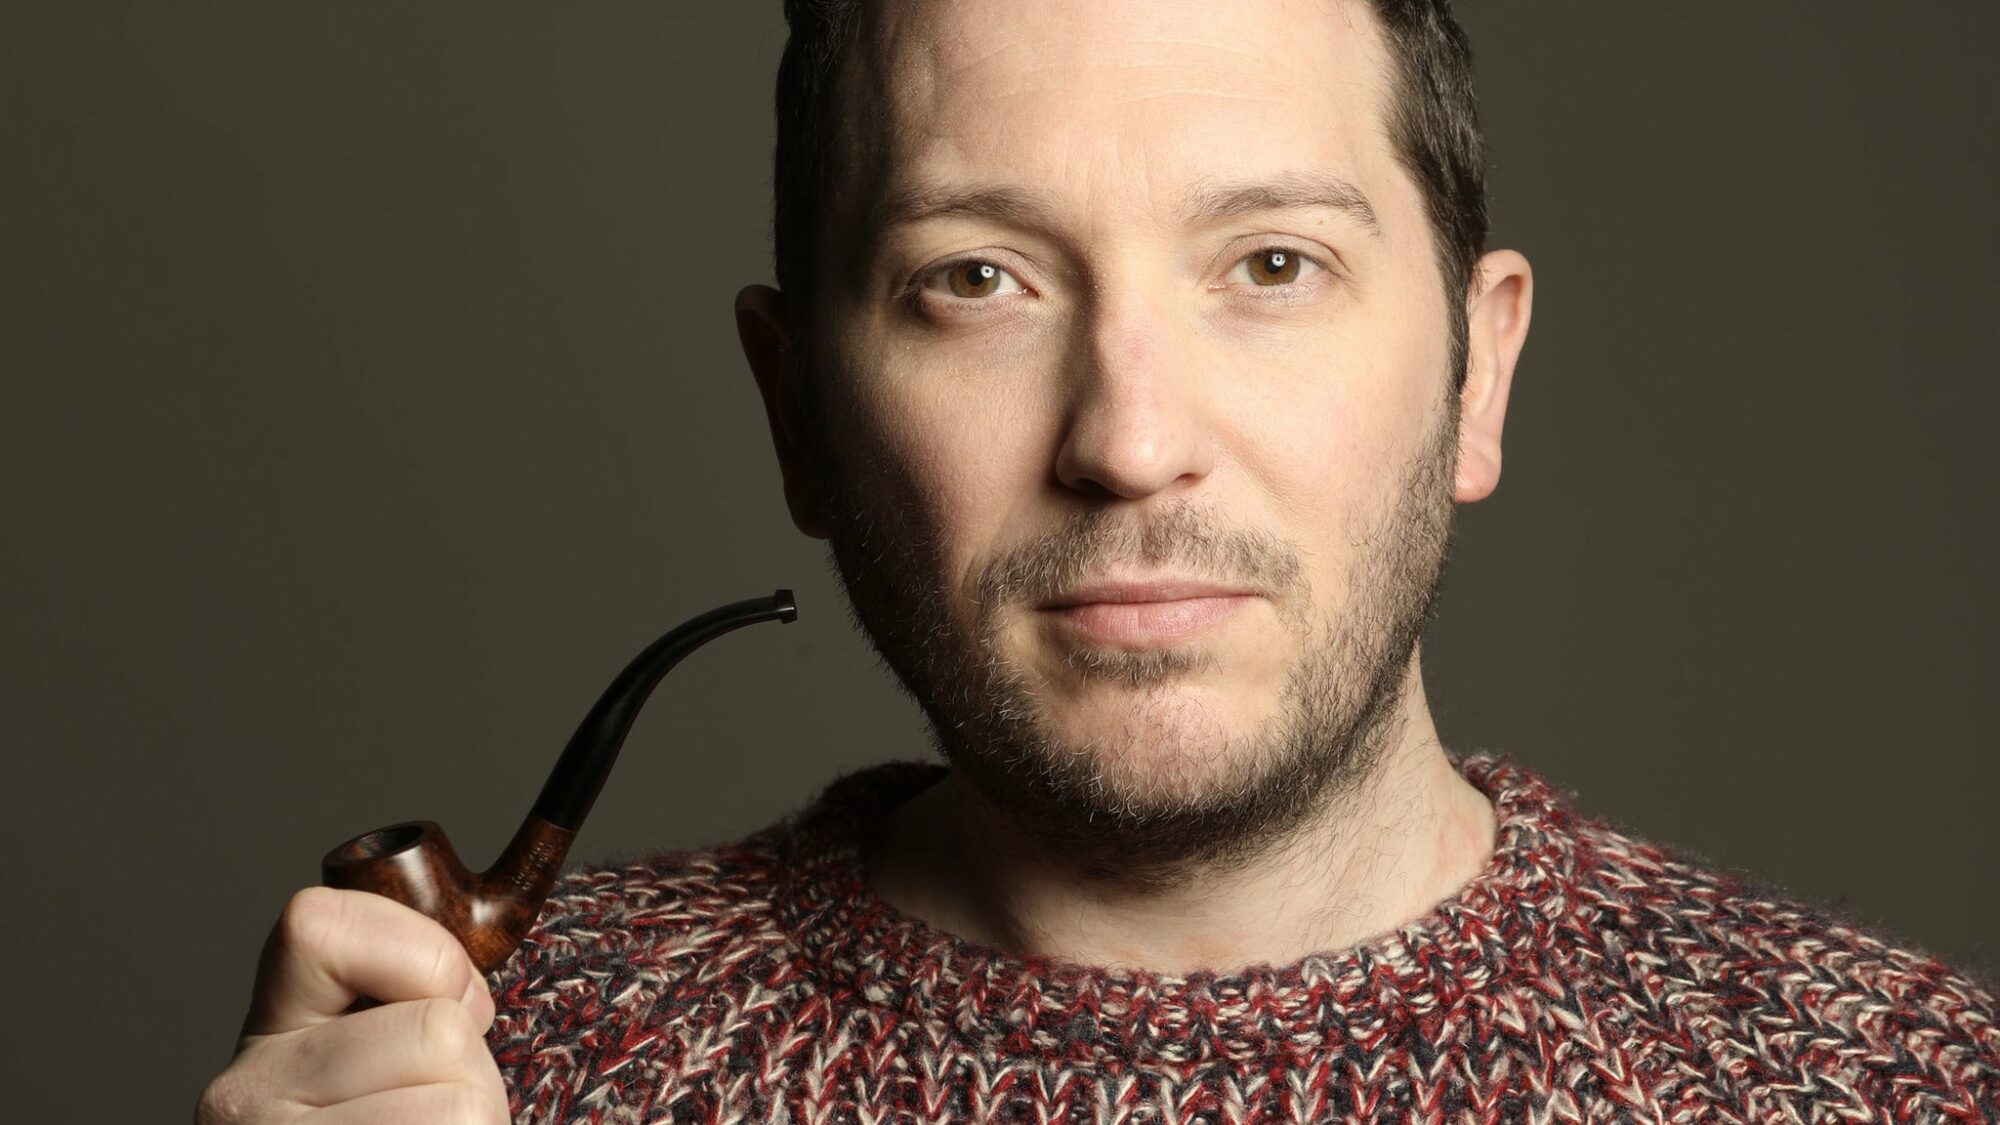 Image name Jon Richardson The Knitwit at Leeds Grand Theatre Leeds the 17 image from the post What’s on next week? From Monday 25th September in Yorkshire.com.